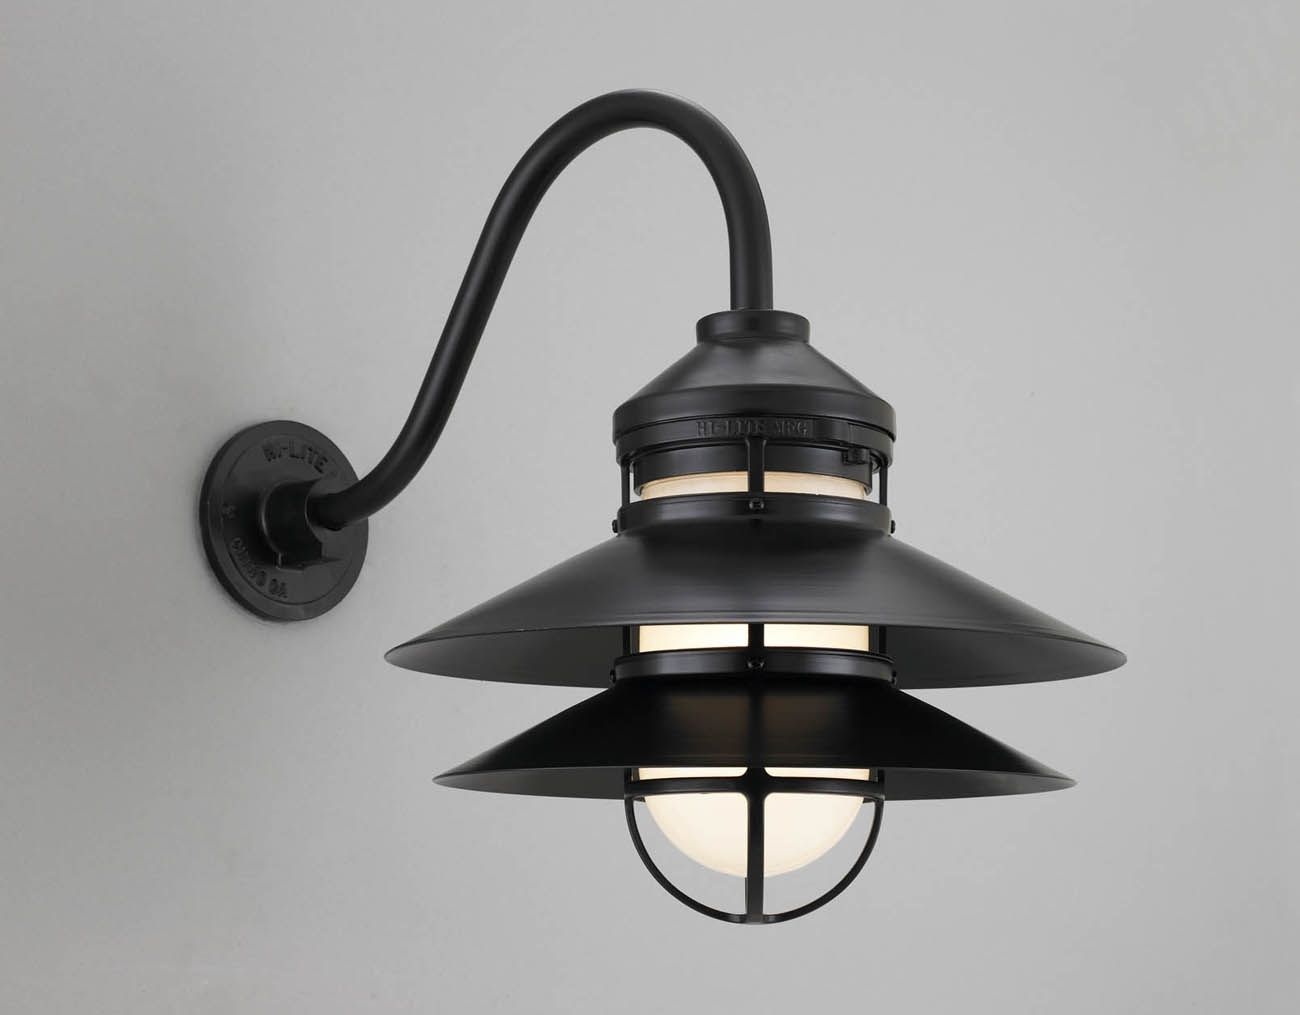 Gooseneck Wall Sconce Outdoor Option | Wall Sconces Regarding Outdoor Gooseneck Wall Lighting (View 15 of 15)